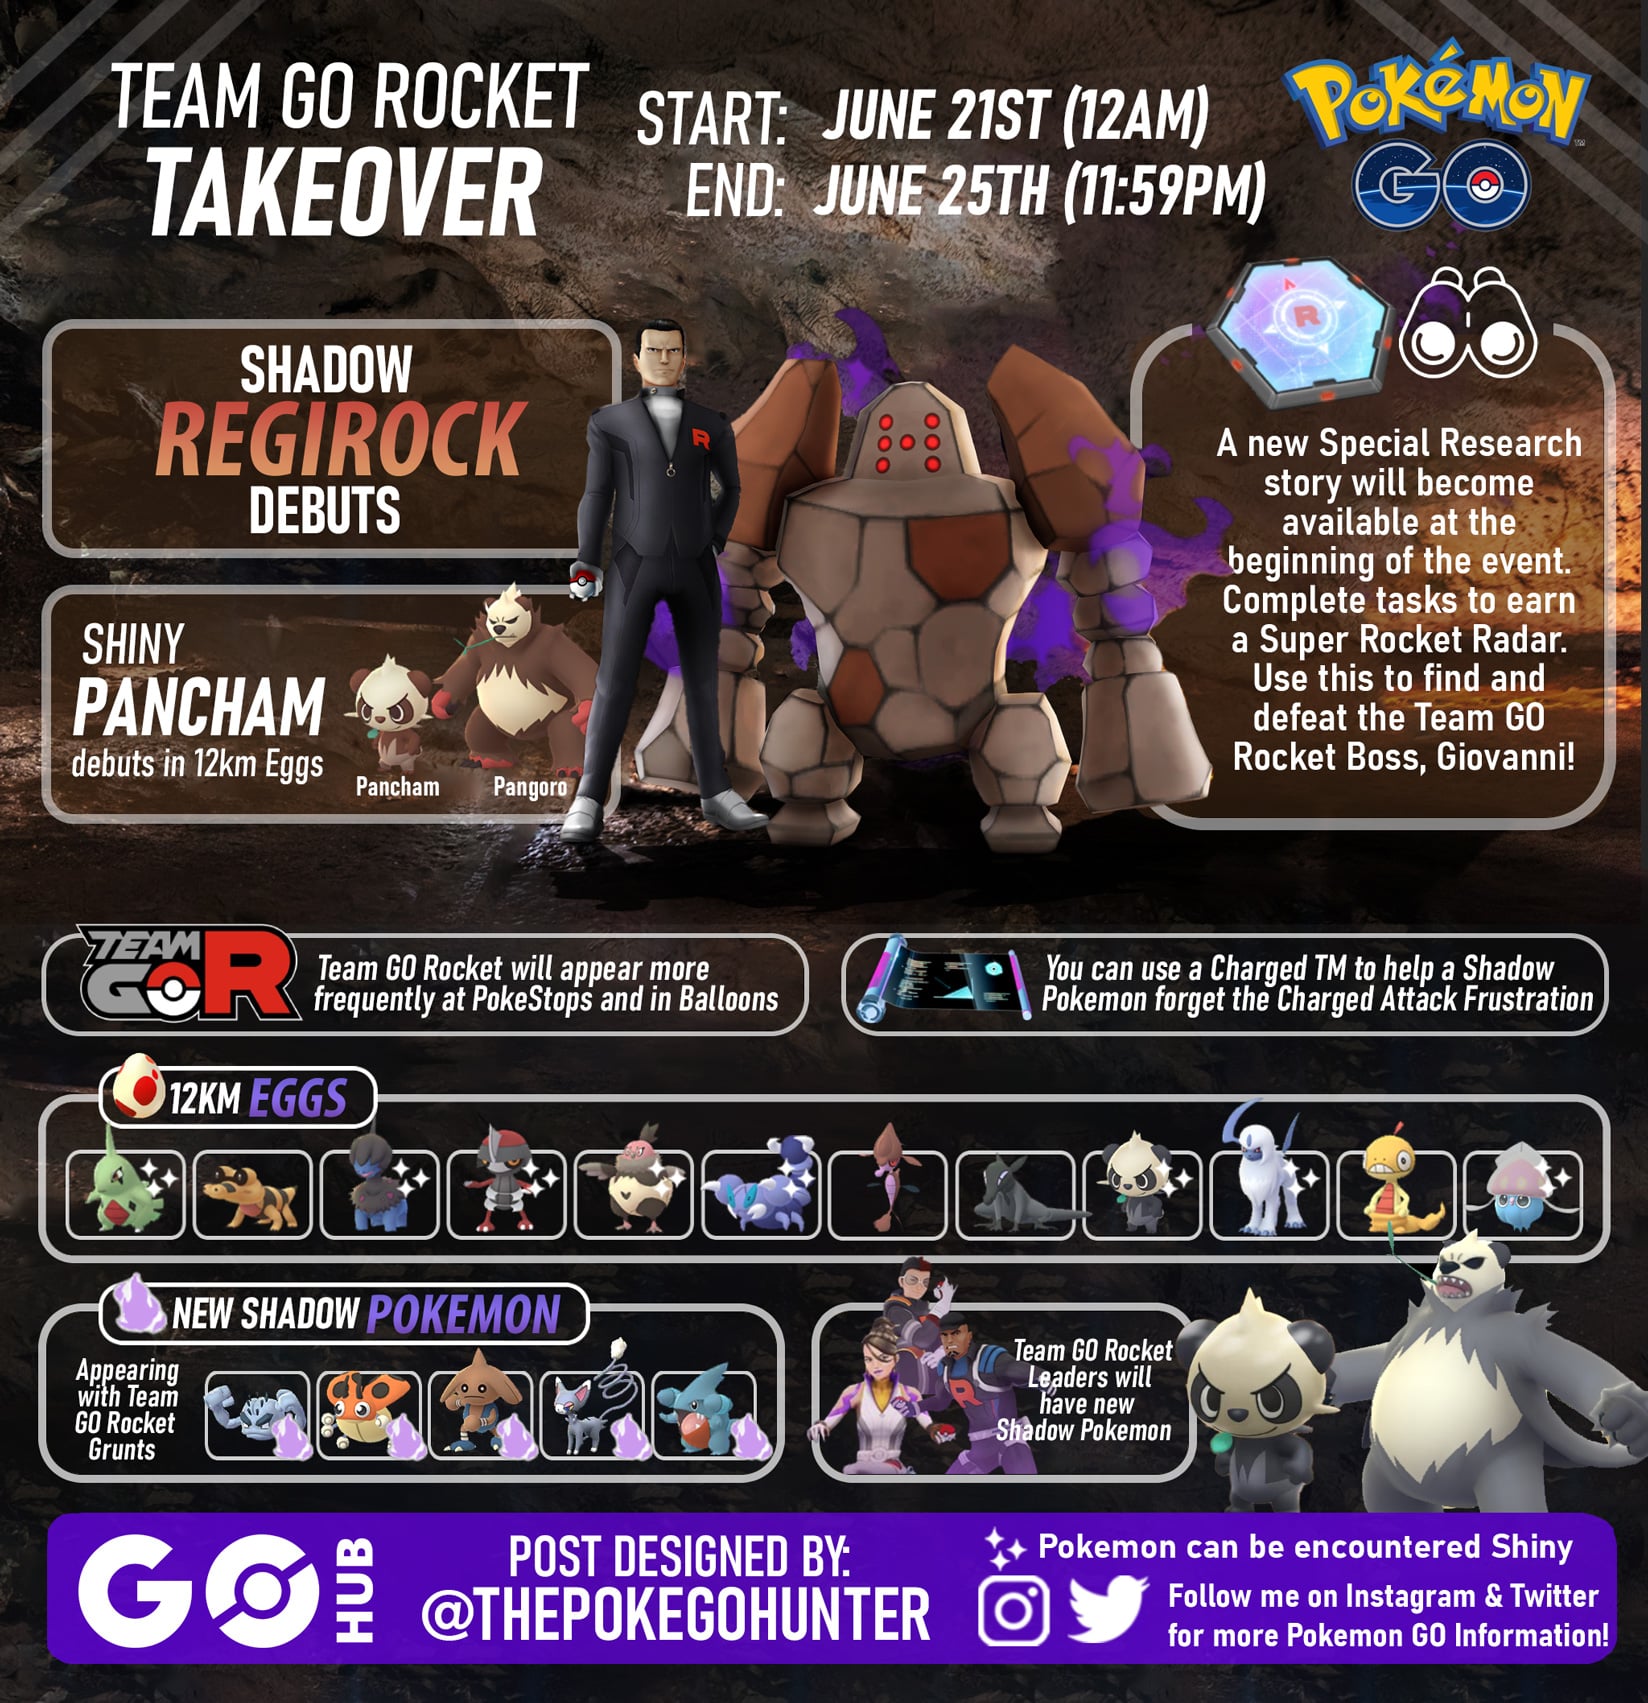 Ultra Beast Protection Efforts Special Research - Pokémon GO